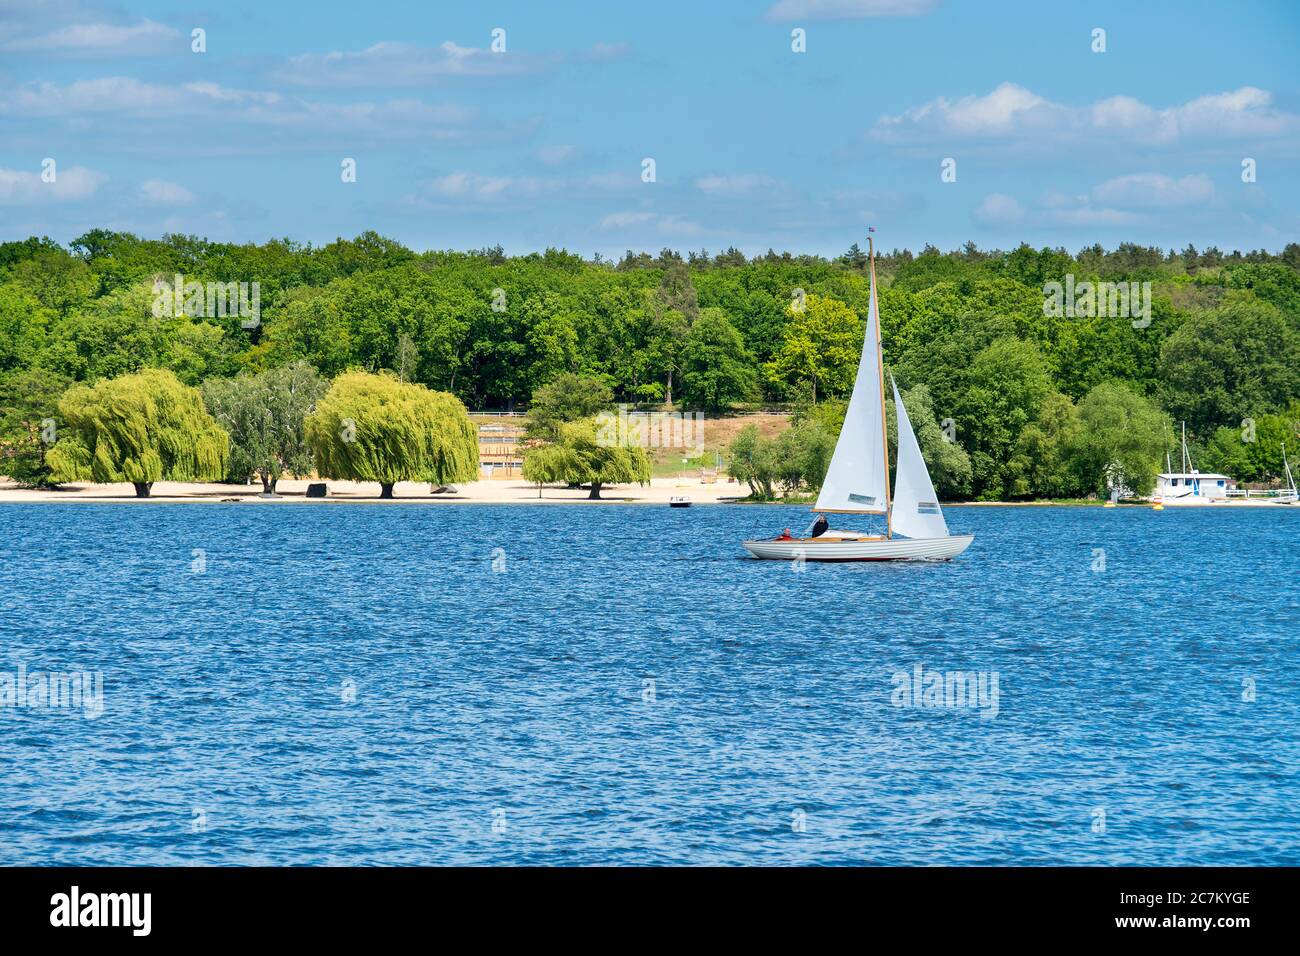 Berlin, Wannsee, view of the Wannsee lido, sailing boat, copy space Stock Photo